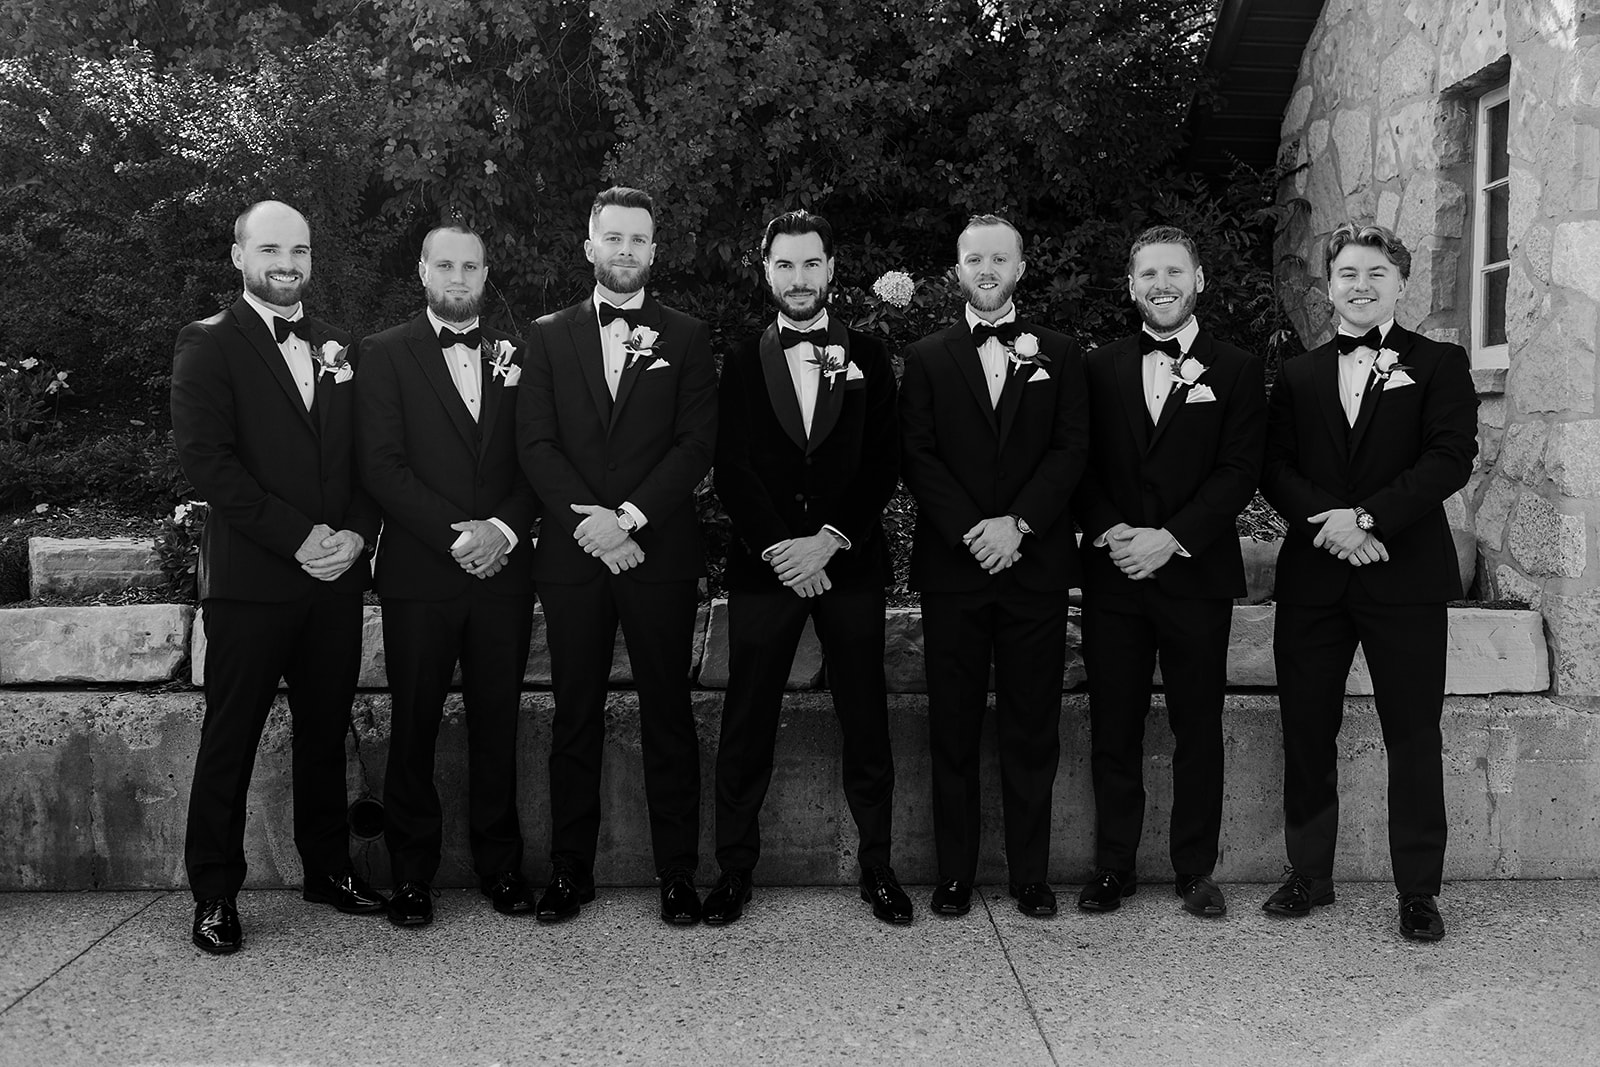 Brandon's groomsmen looking dapper in suits against the autumn backdrop of Cambridge Mill, embodying rustic charm